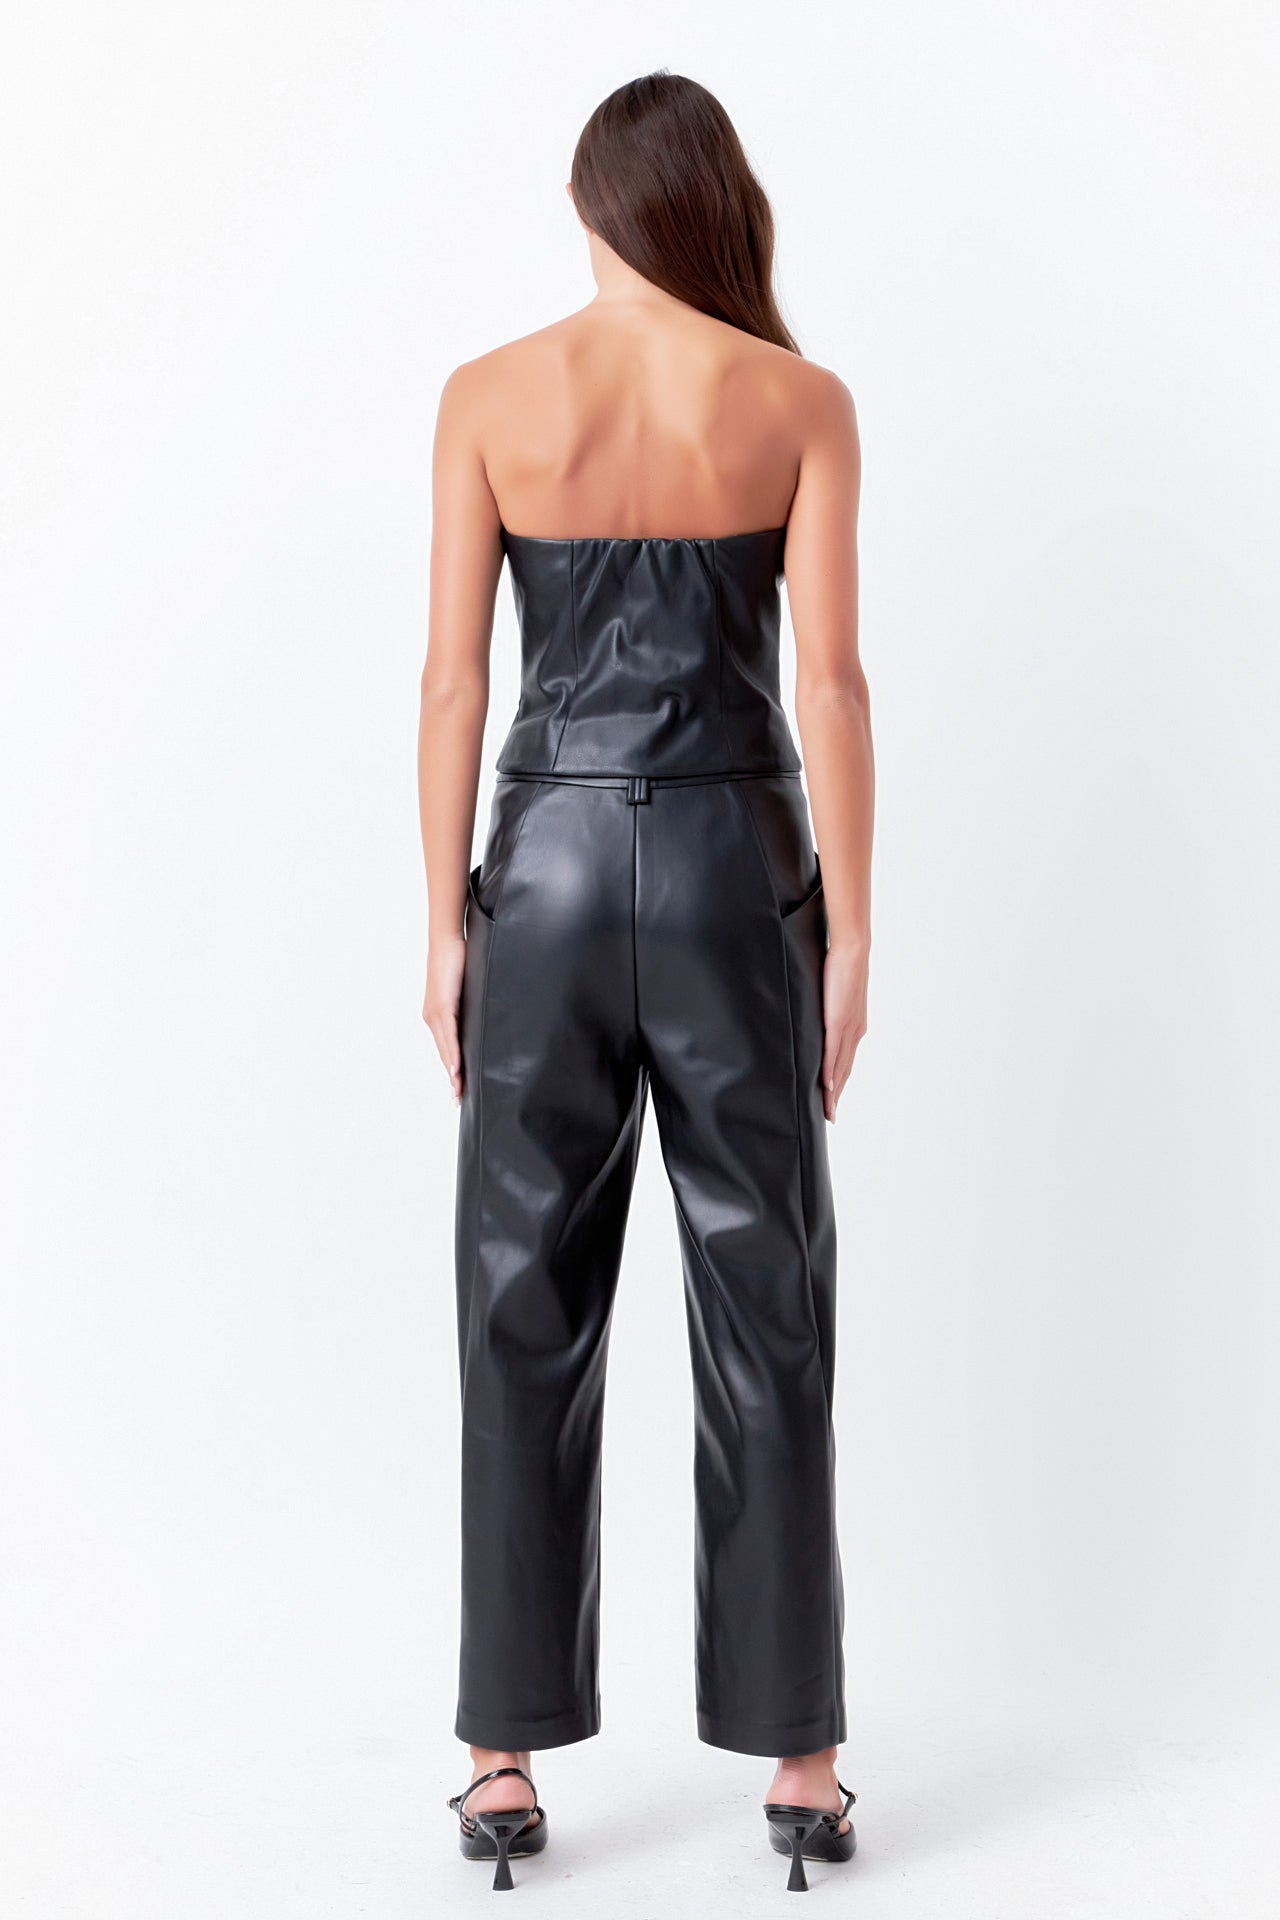 ENDLESS ROSE - Faux Leather Strapless Top - TOPS available at Objectrare